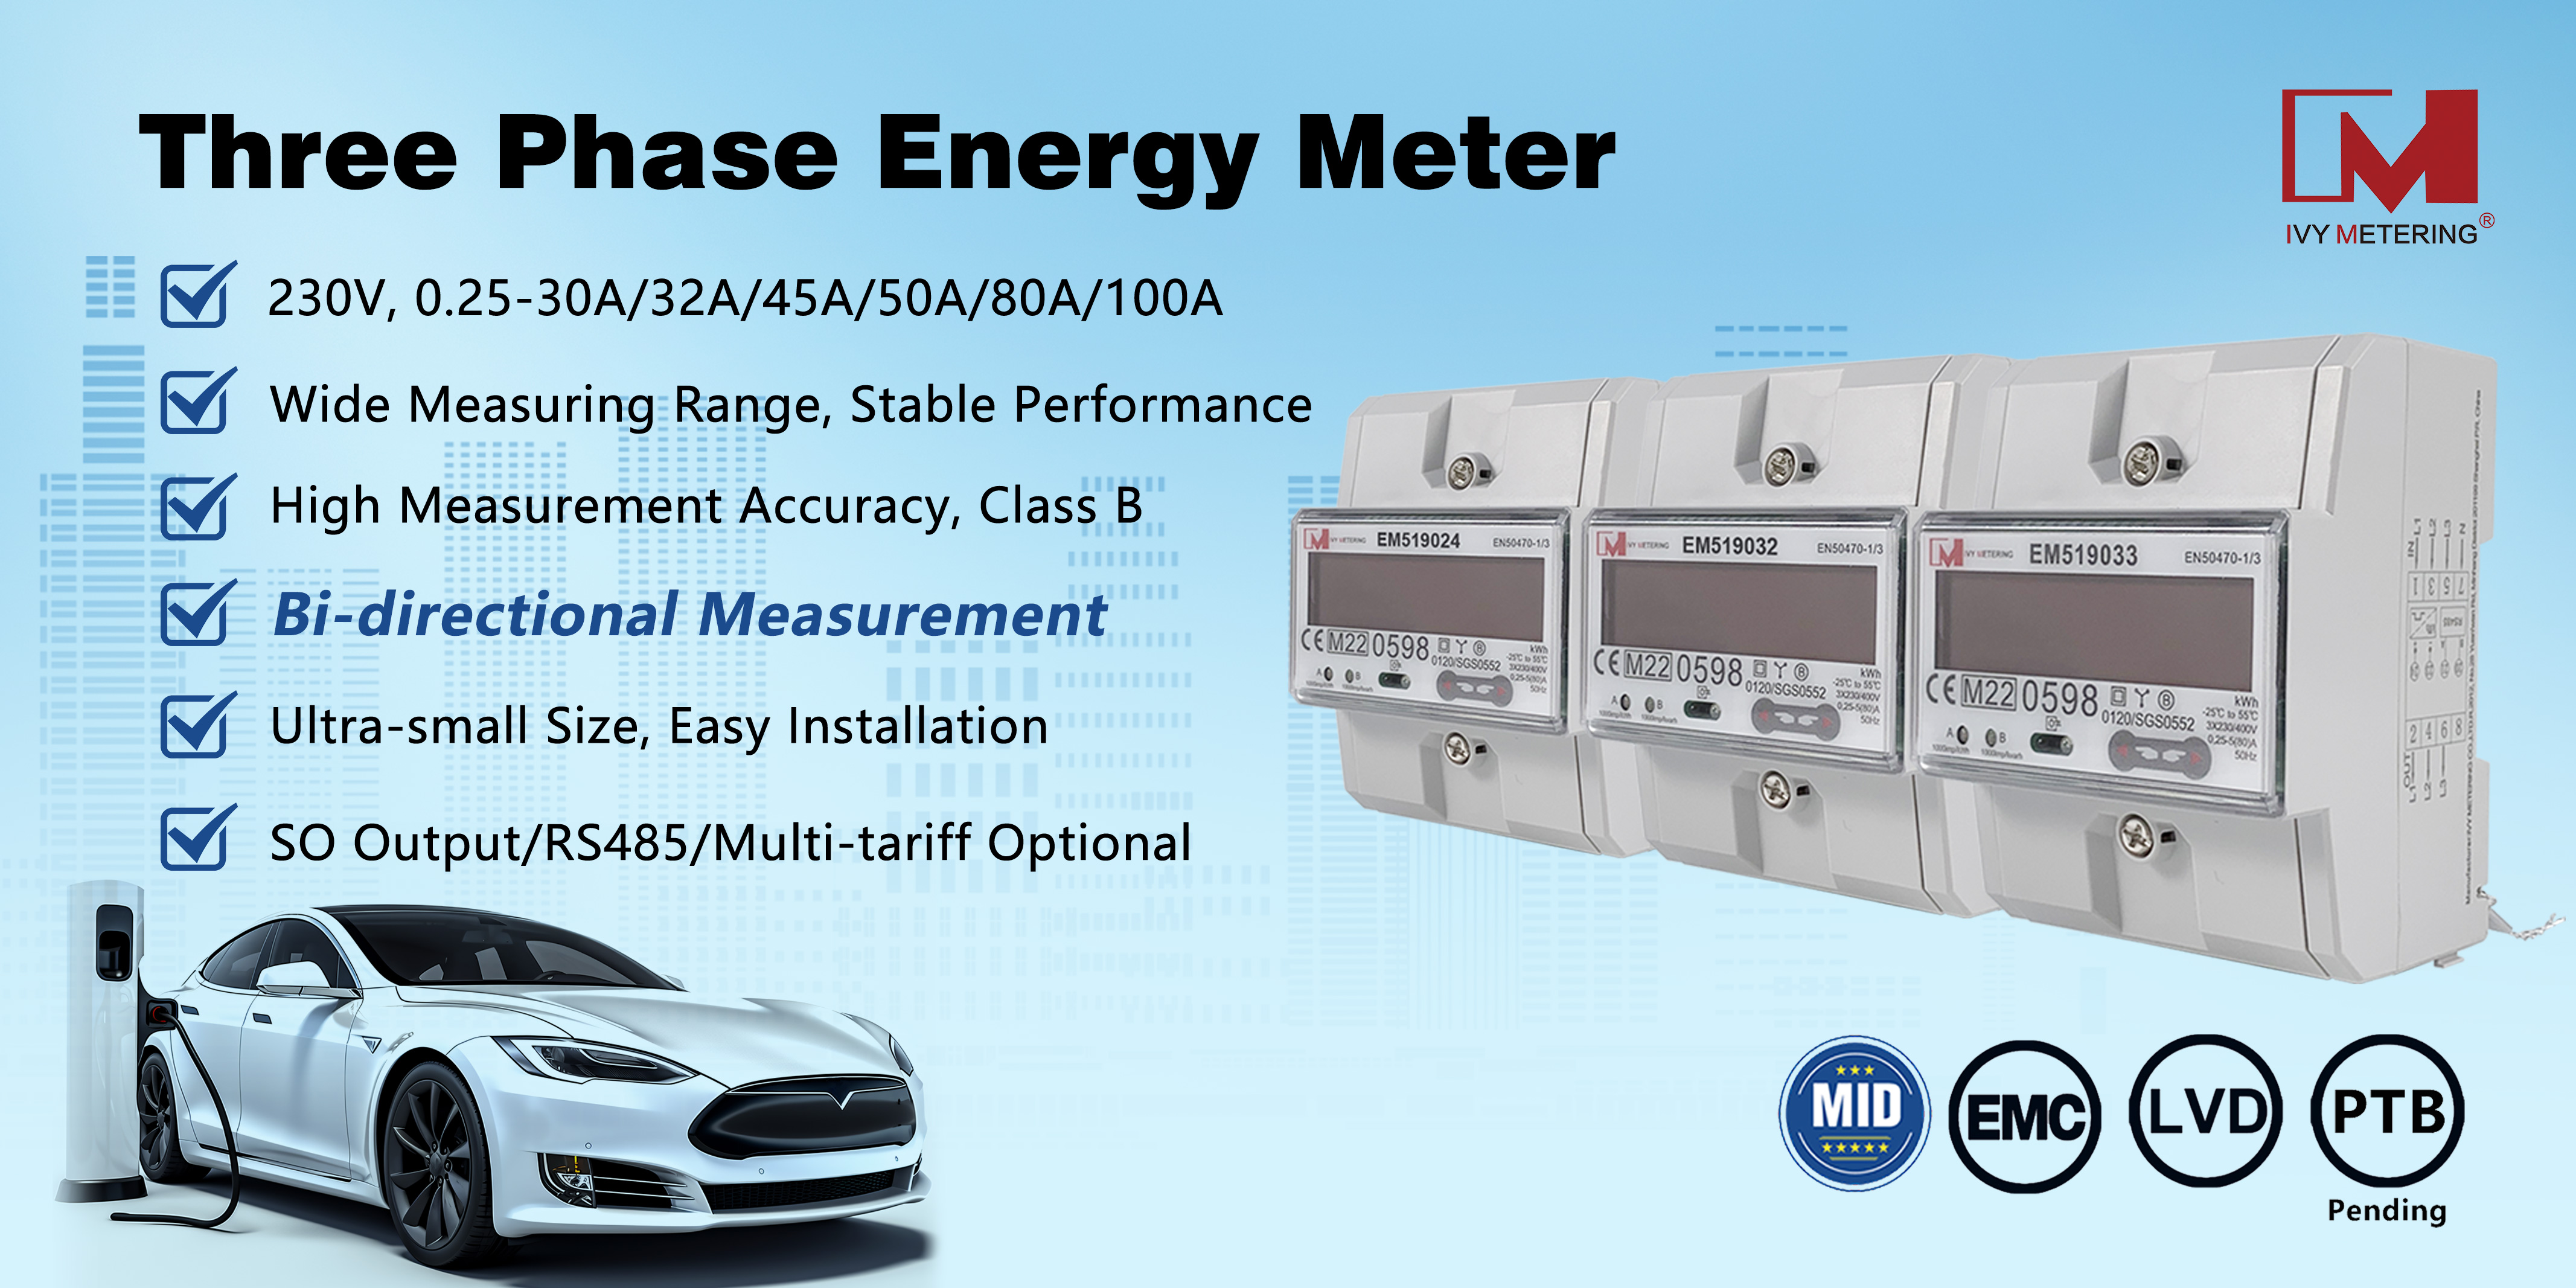 EM519033 3 Phase Energy Power Motoring Meters With Rs485 Bidirectional Electricity Meter